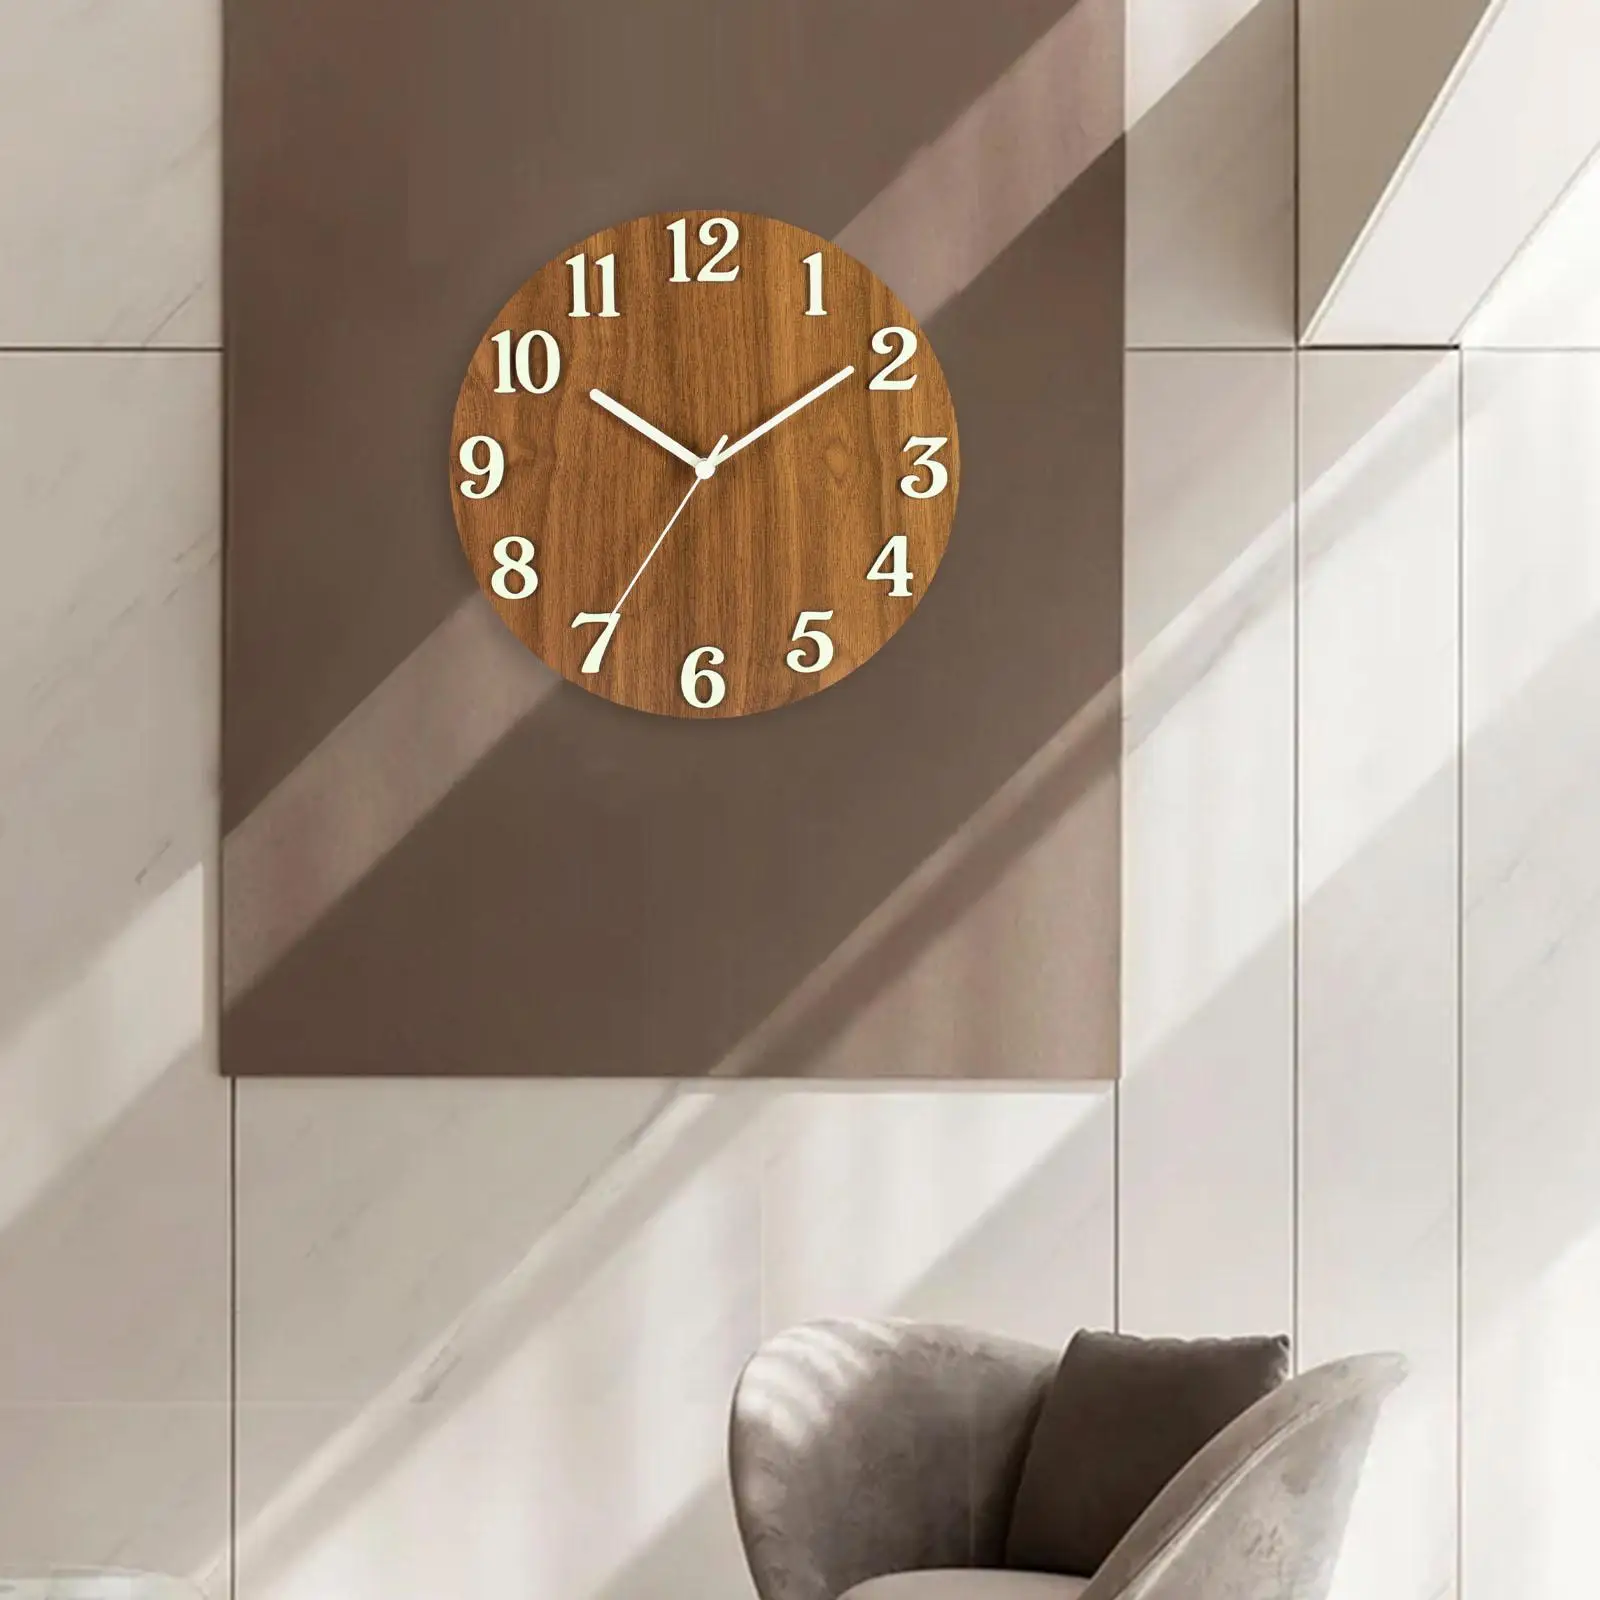 Modern Luminous Wall Clock Hanging Clock Non Ticking Battery Operated Analog Silent Round 12 inch for Dining Room Kitchen Home